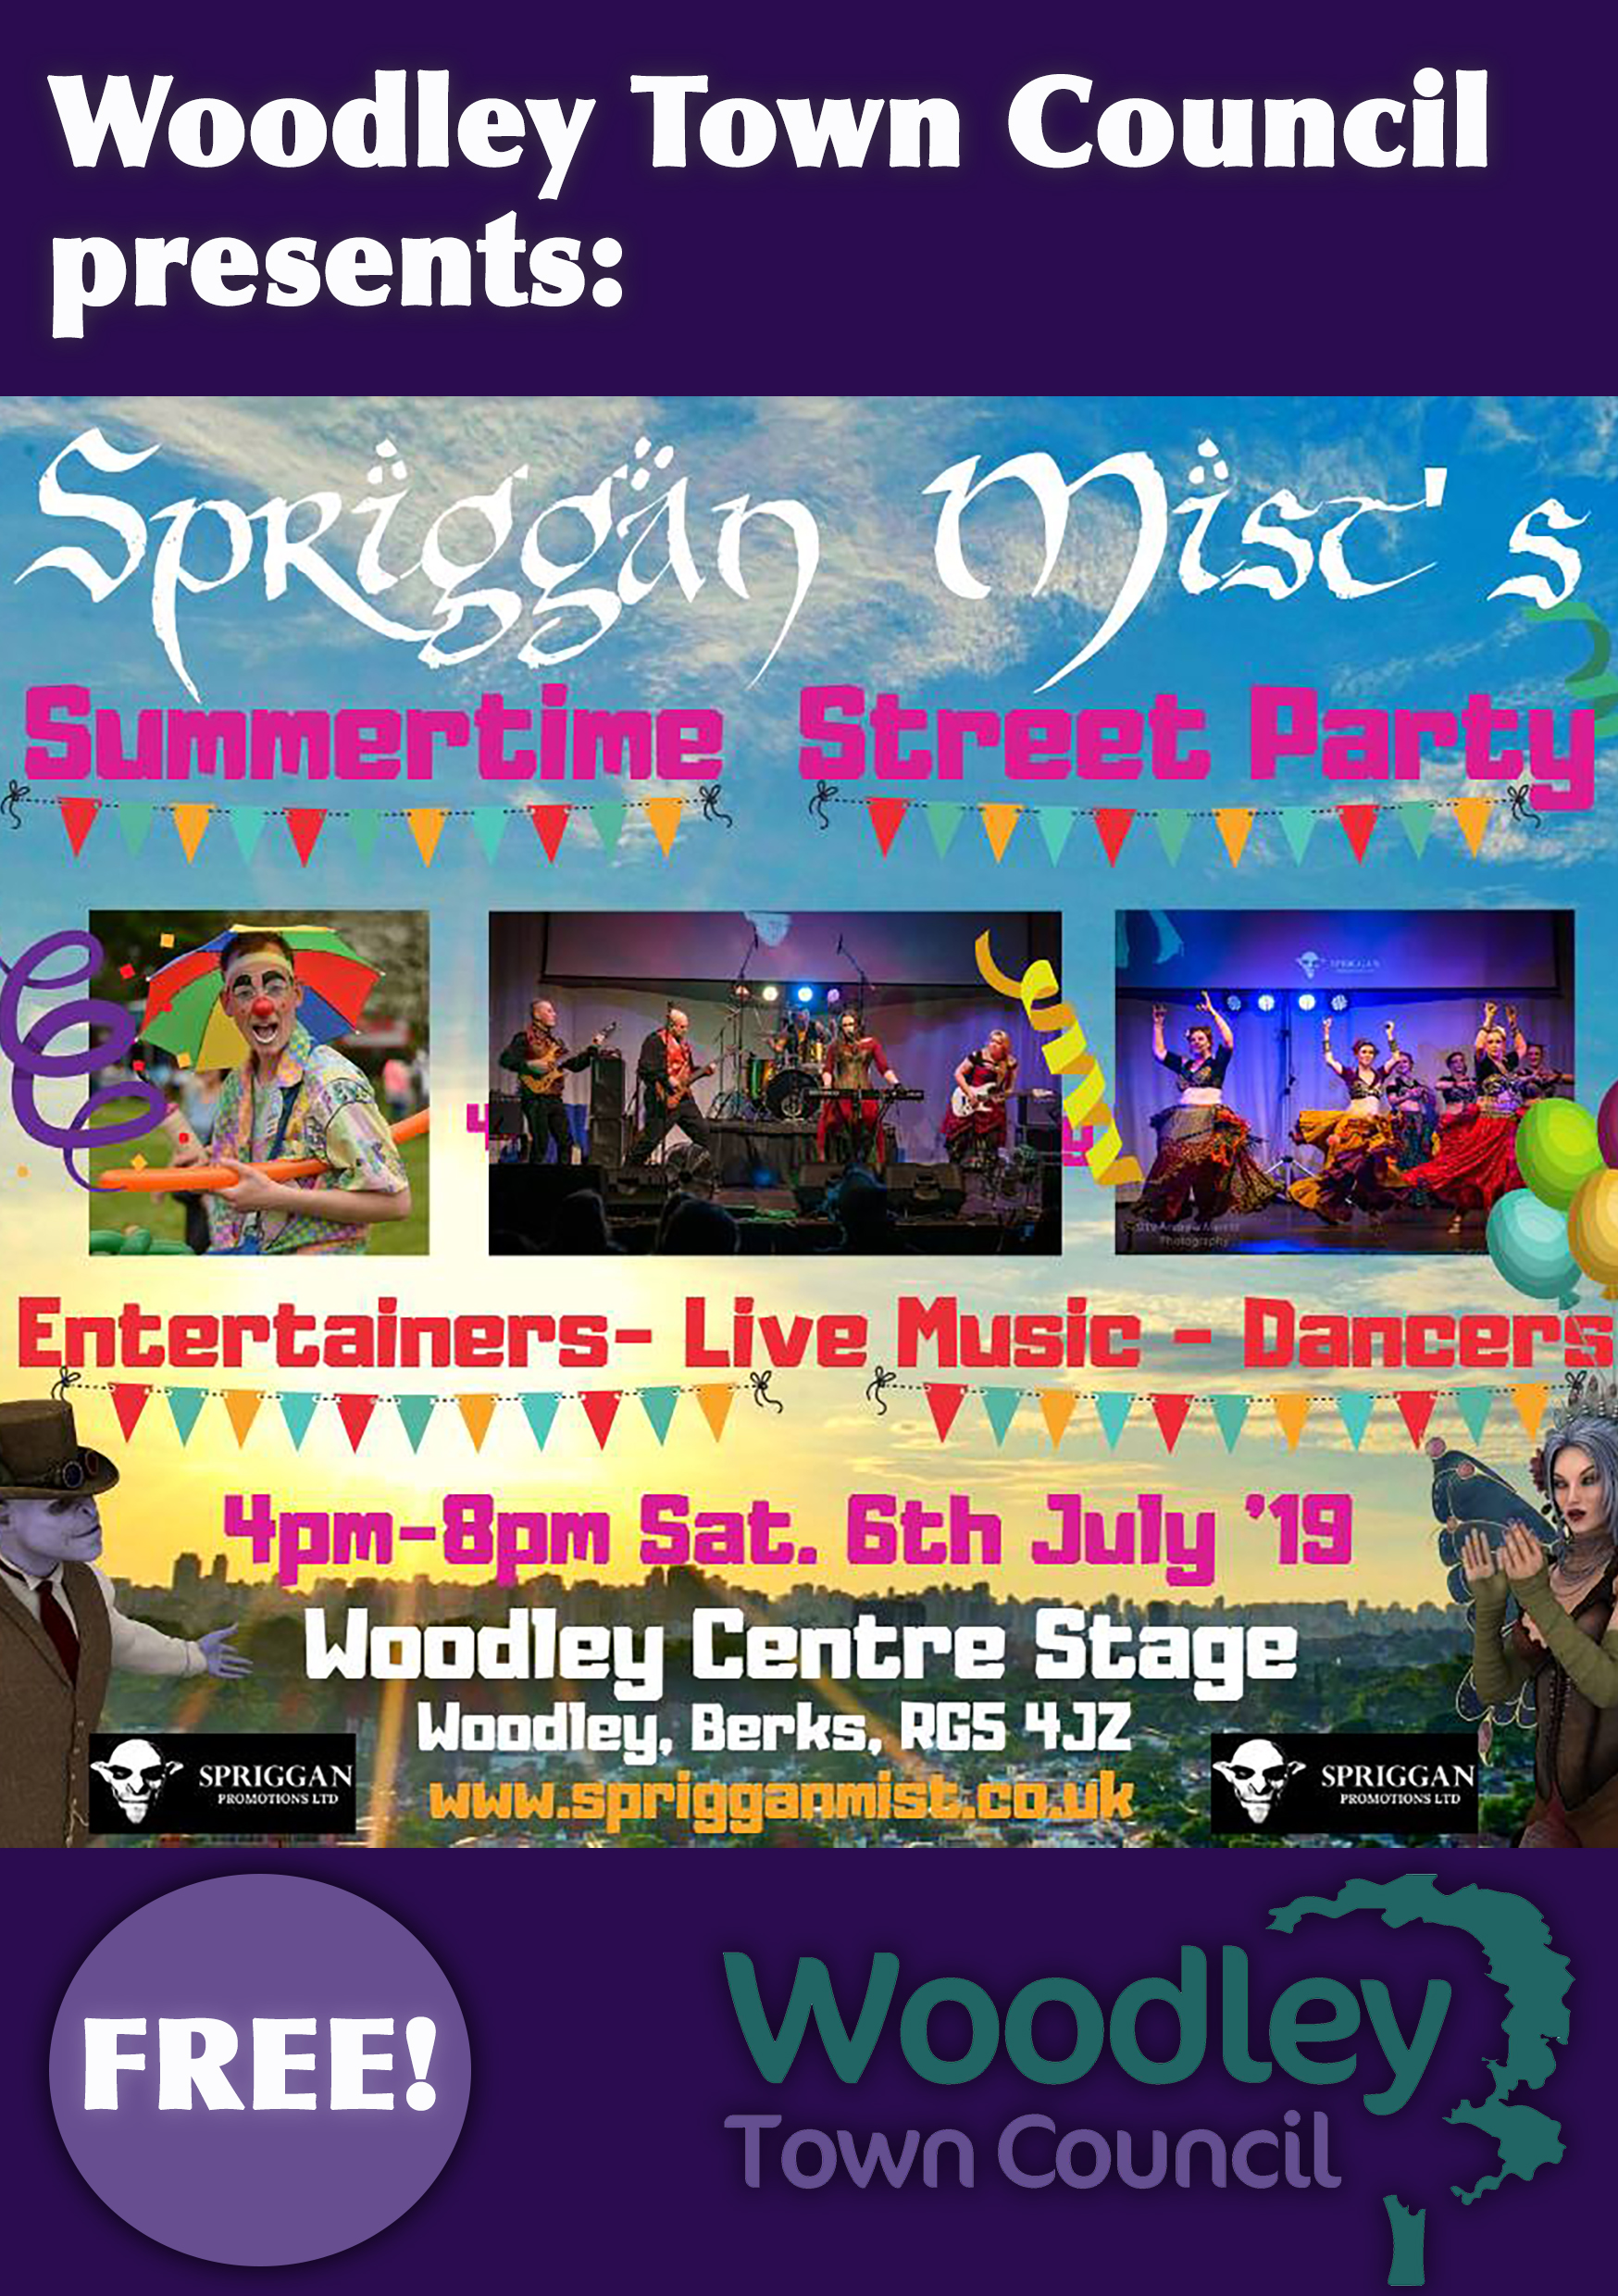 Woodley Town Council Street Party Centre Stage